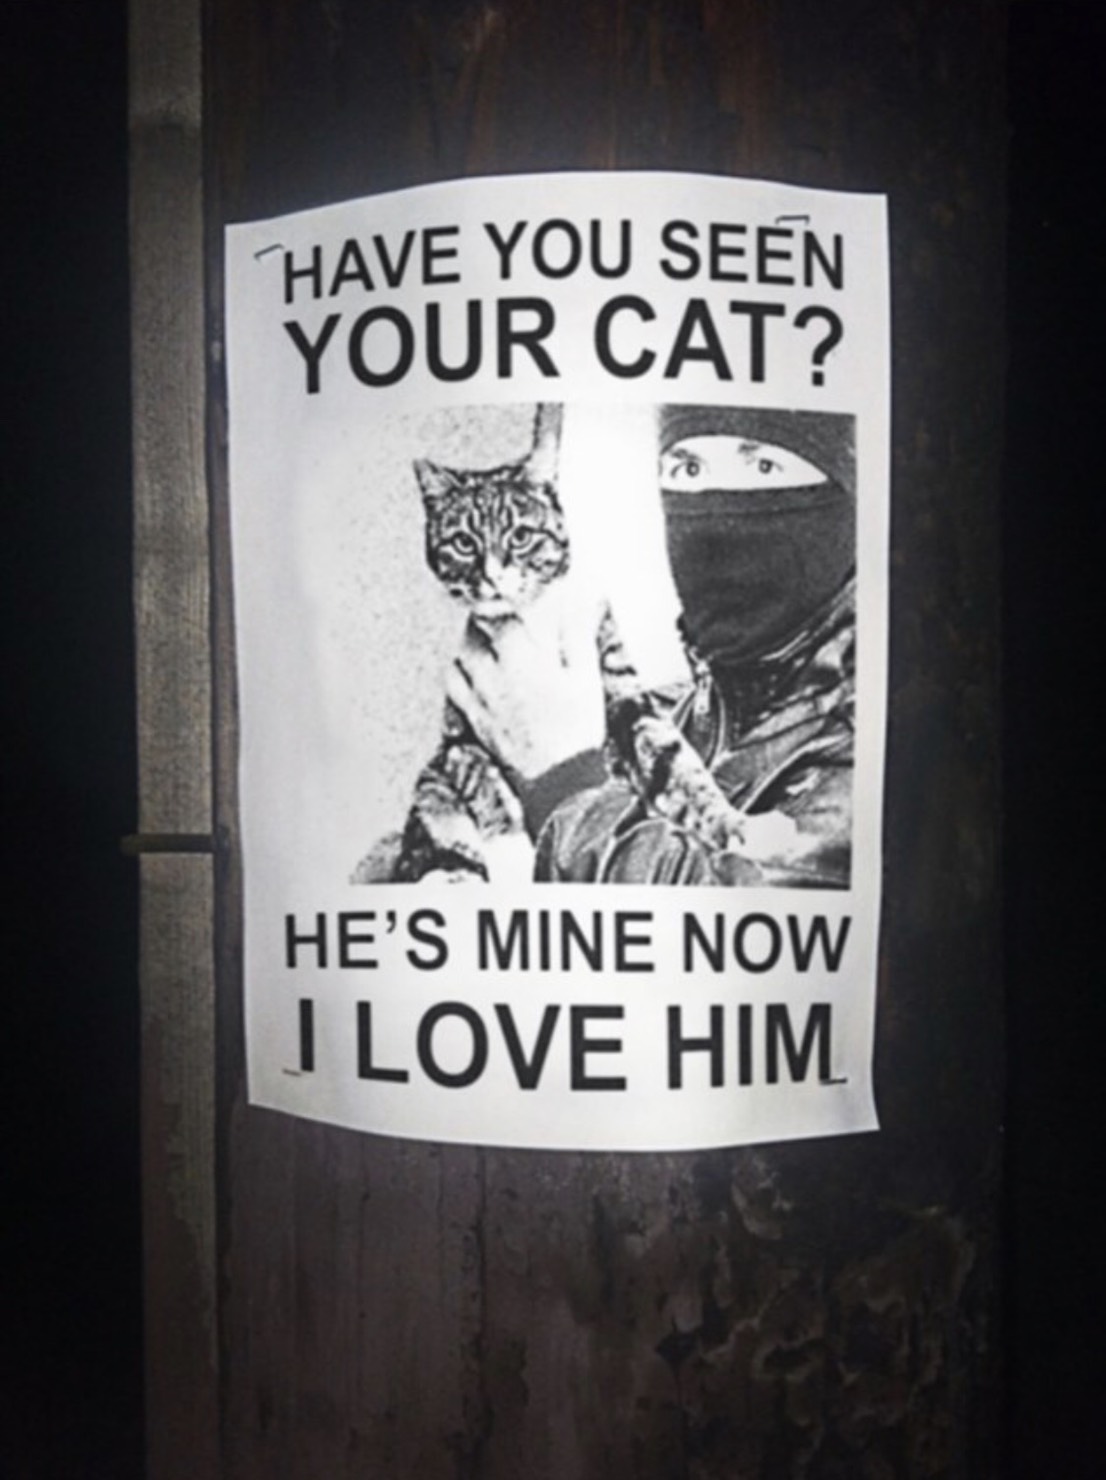 have you seen your cat he's mine now i love him - Have You Seen Your Cat? He'S Mine Now I Love Him